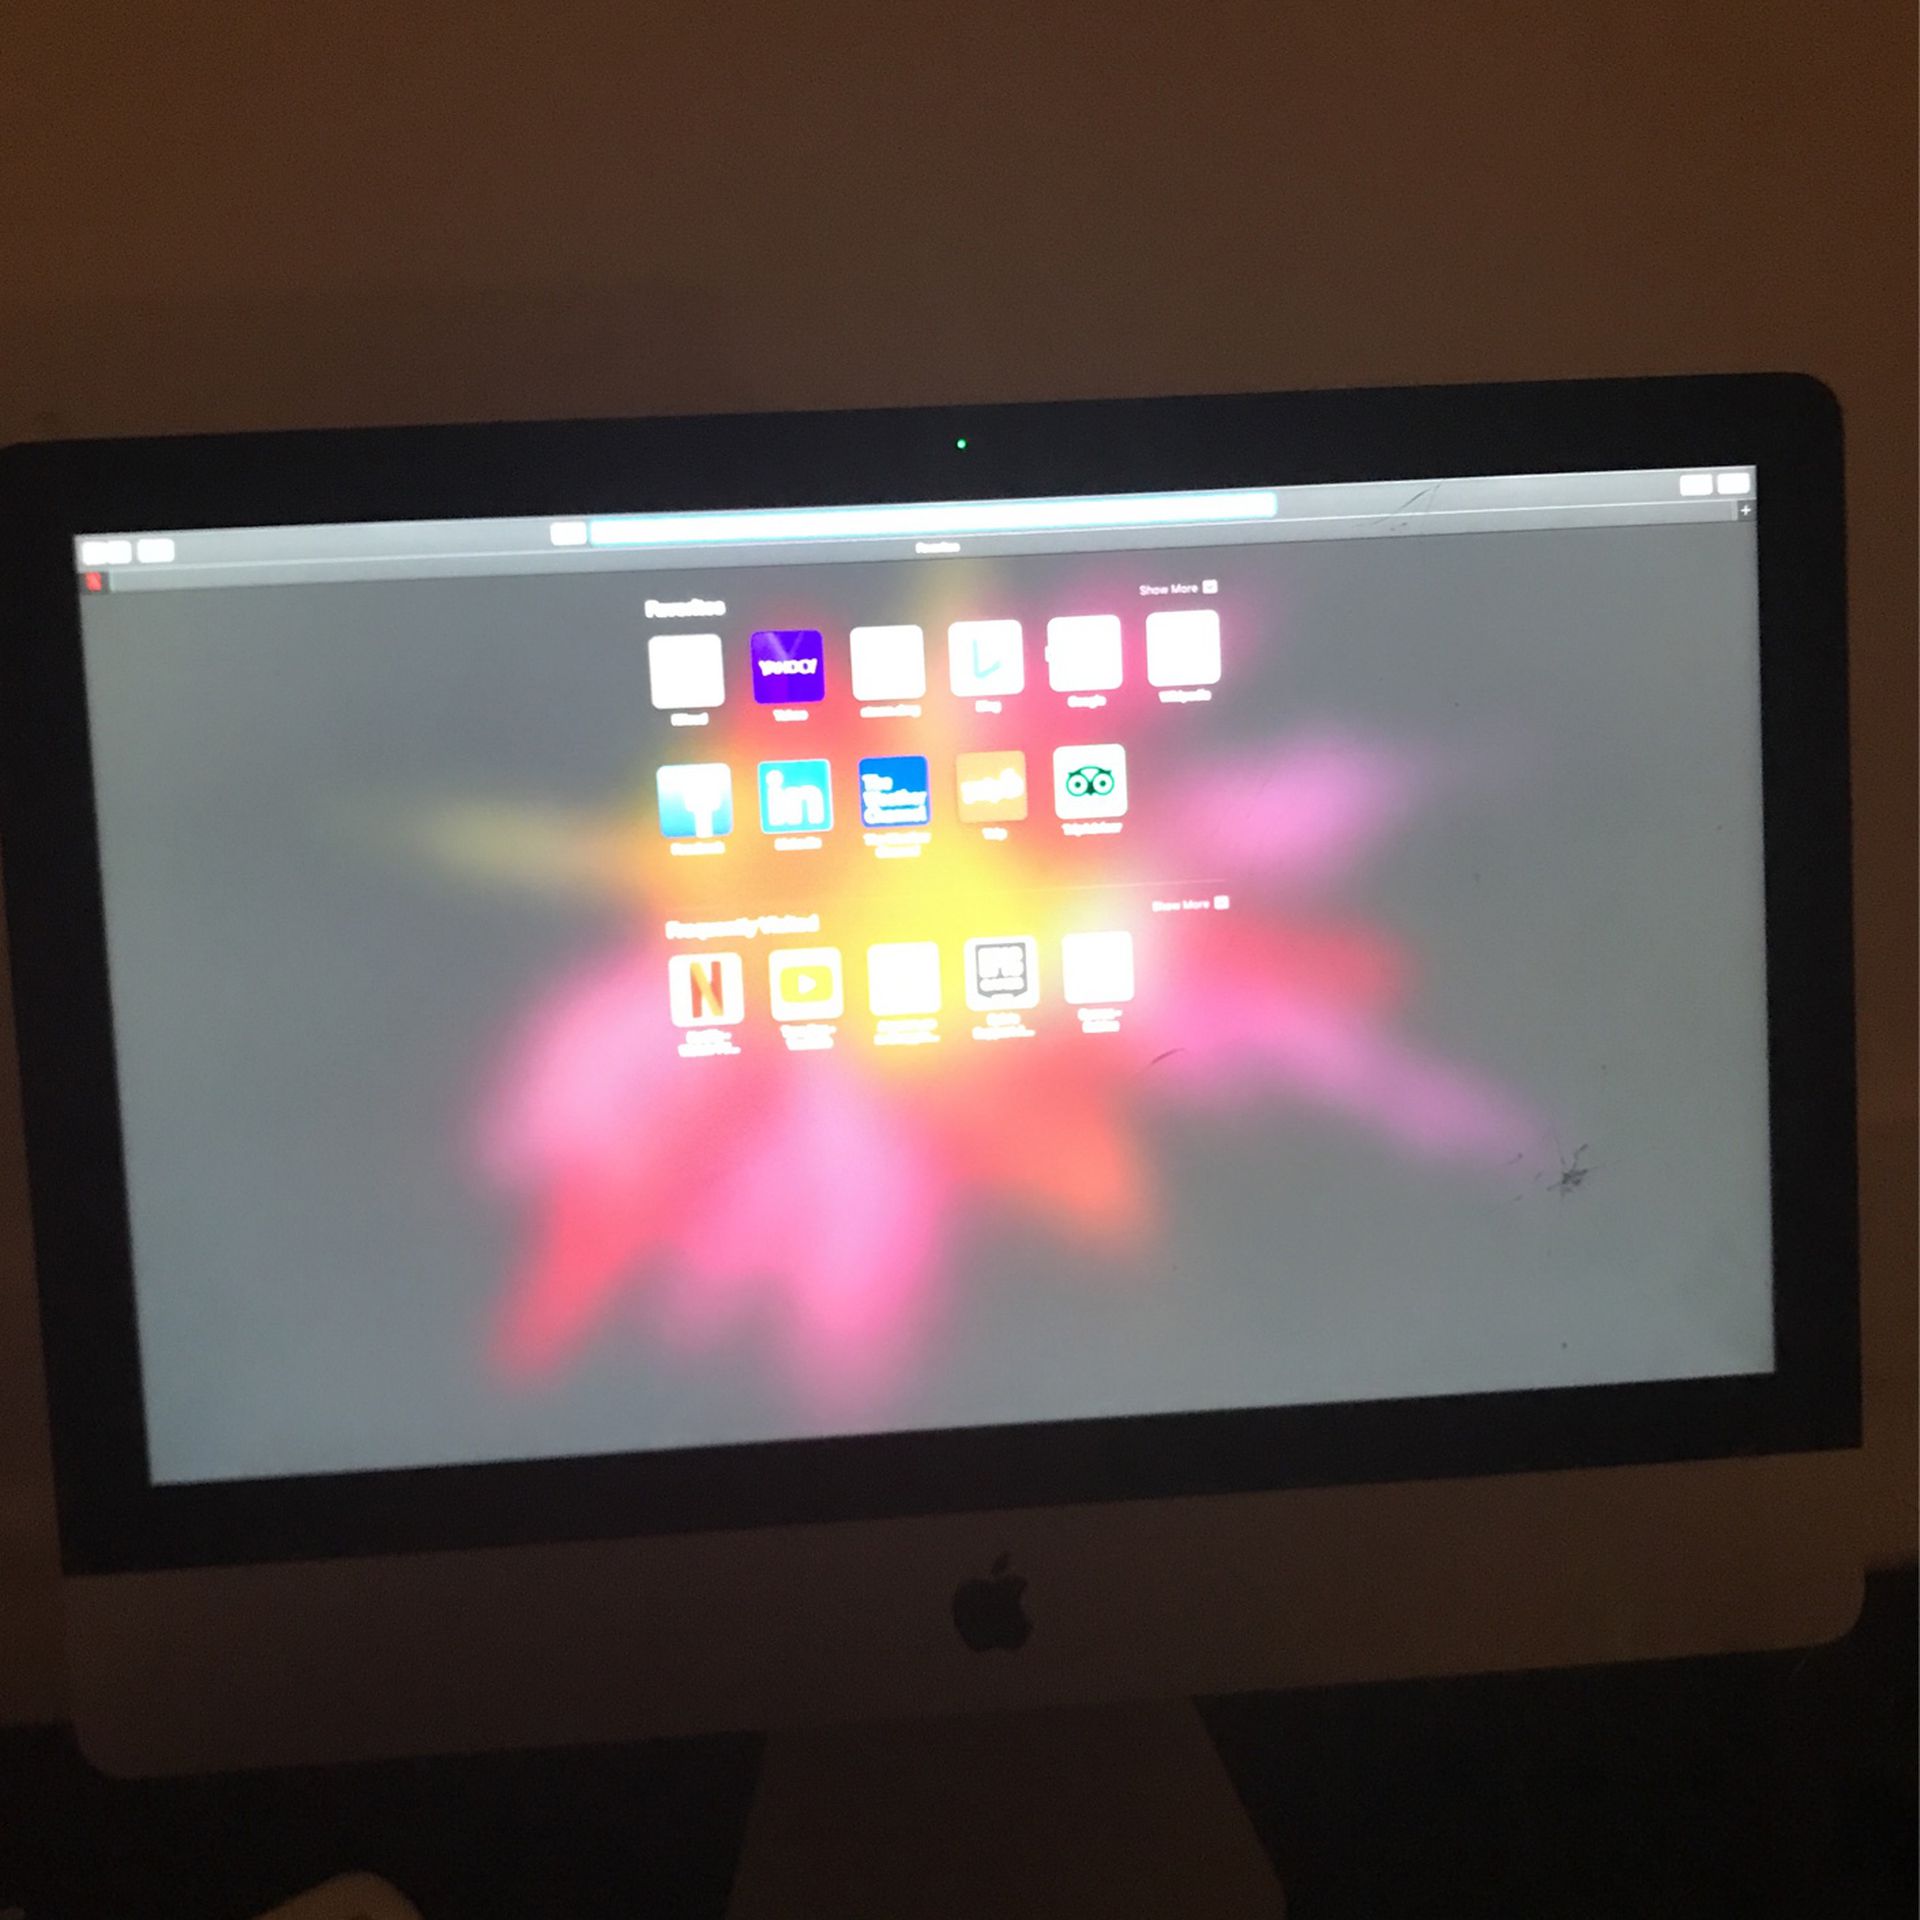 Selling my Early 2013 21 inch Mac running version 10.15.5